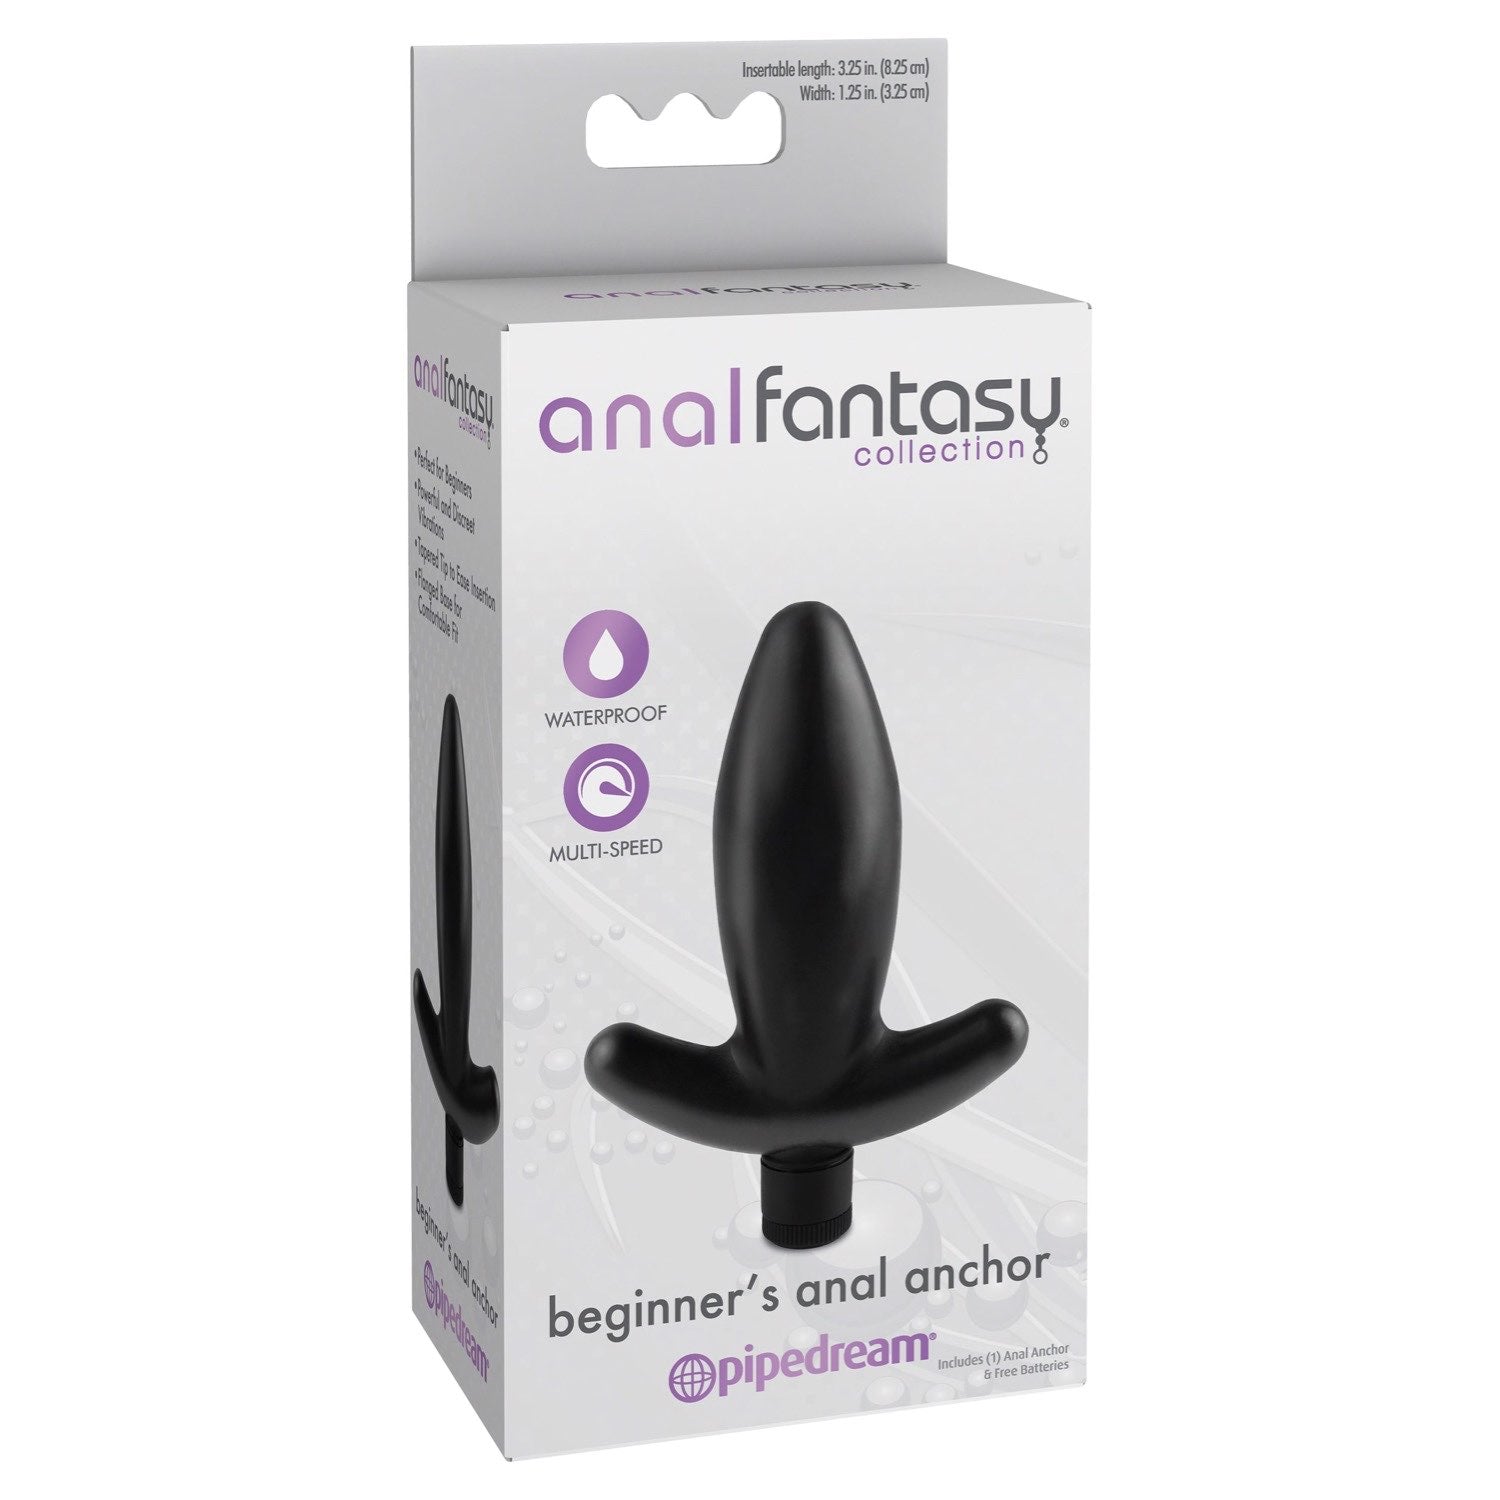 Anal Fantasy Collection Beginner&#39;s Anal Anchor - Black 8.25 cm (3.25&quot;) Vibrating Butt Plug by Pipedream